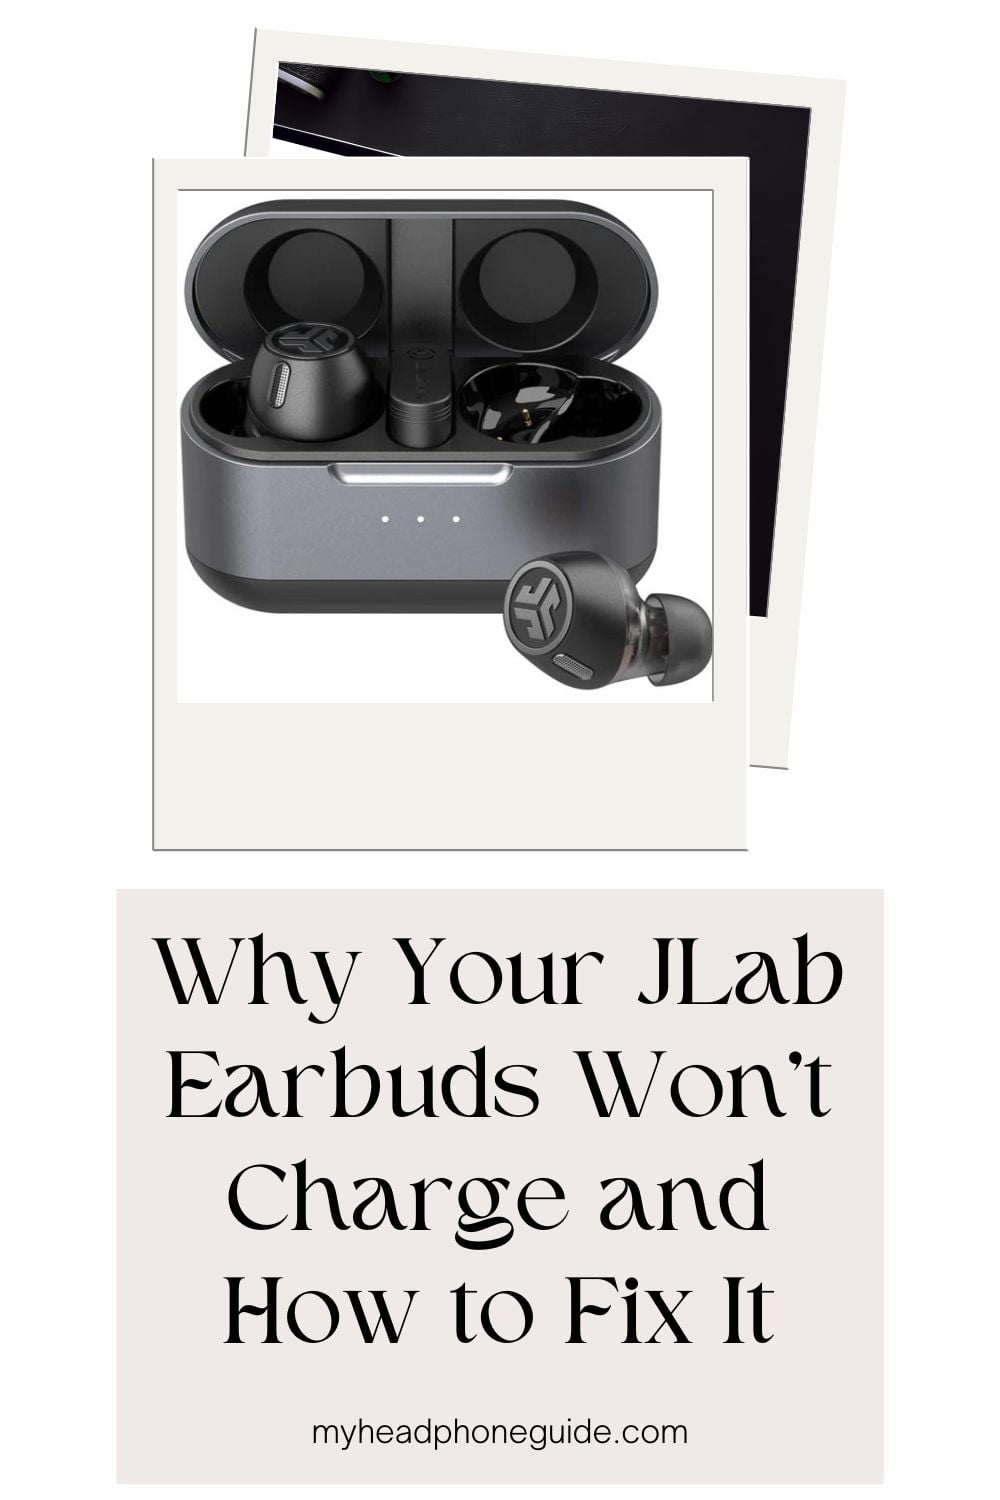 Why Your JLab Earbuds Won't Charge and How to Fix It